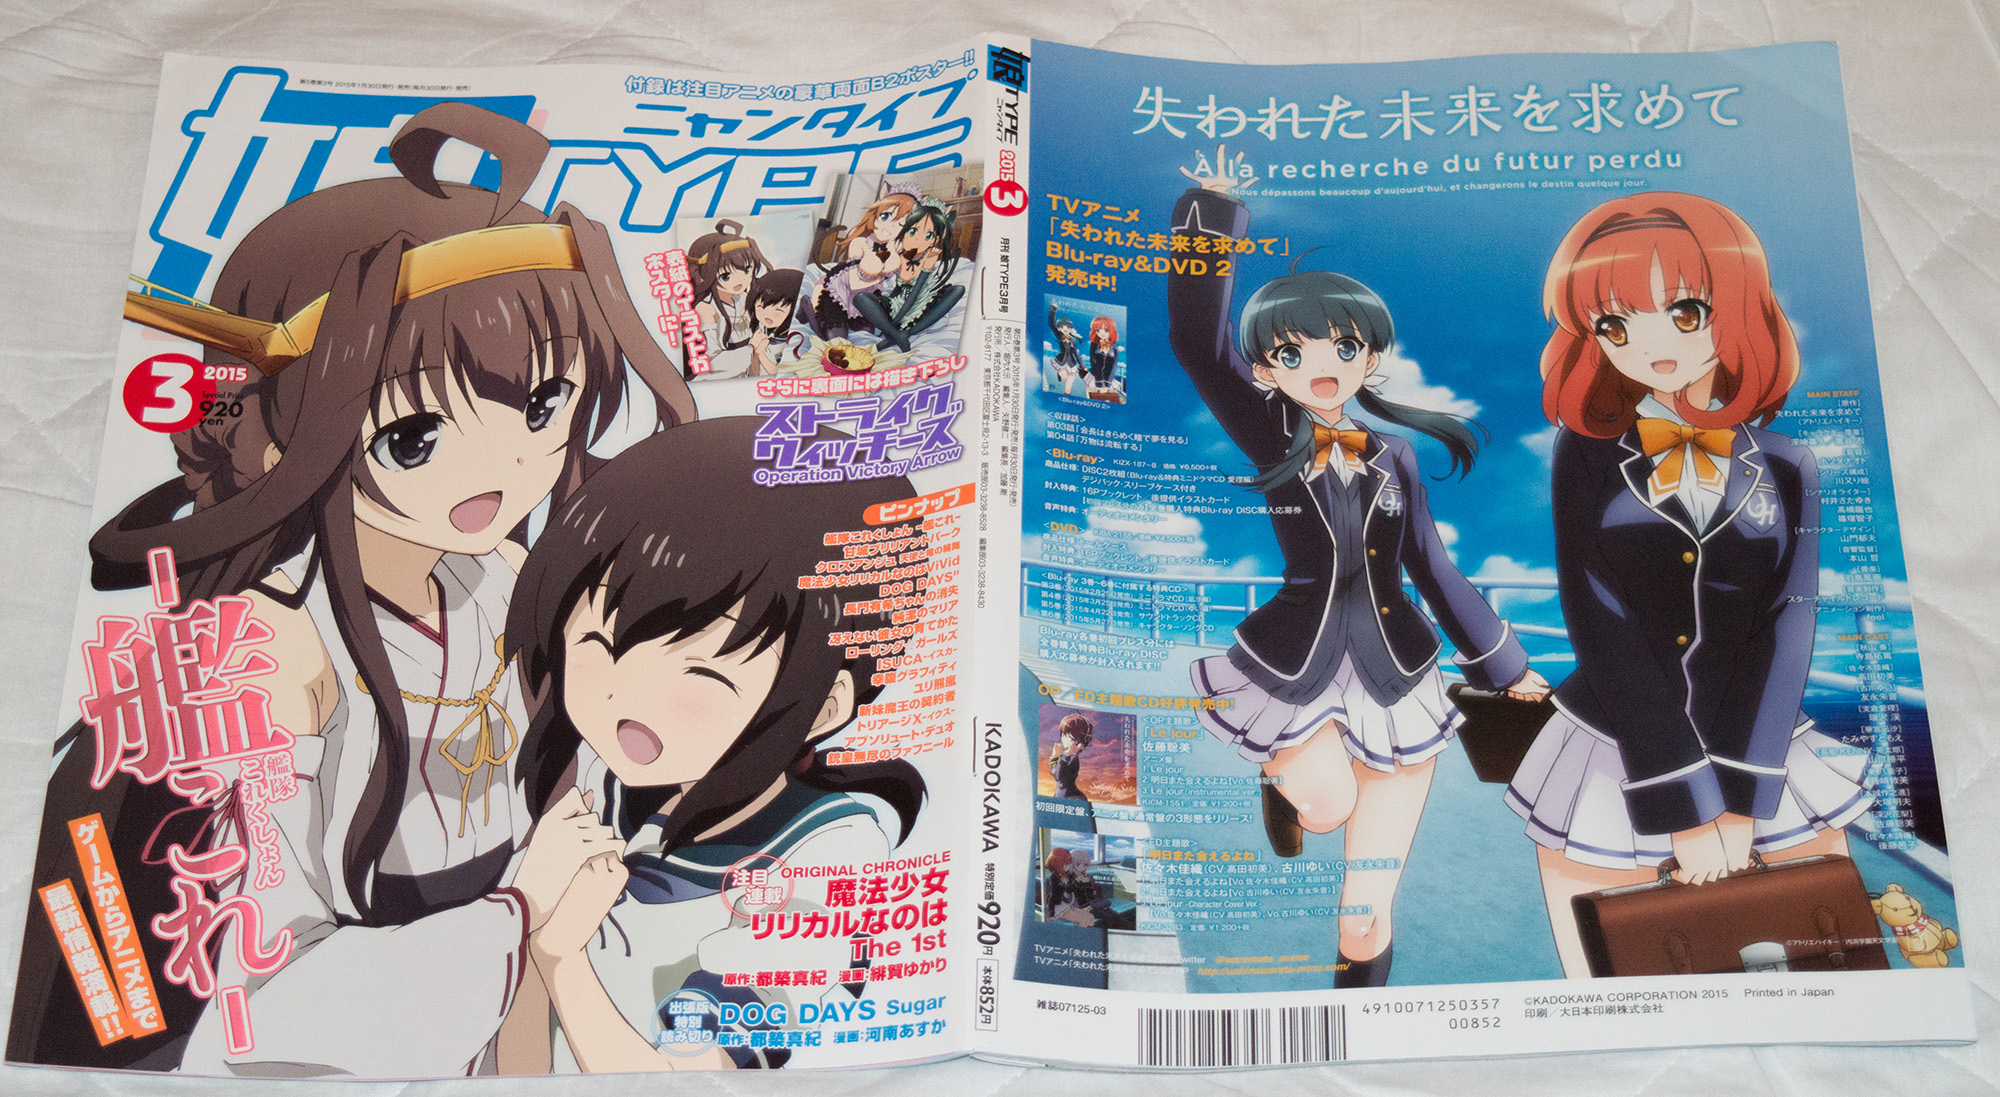 NyanType Magazine March 2015 anime posters Haruhichan.com Cover and Back